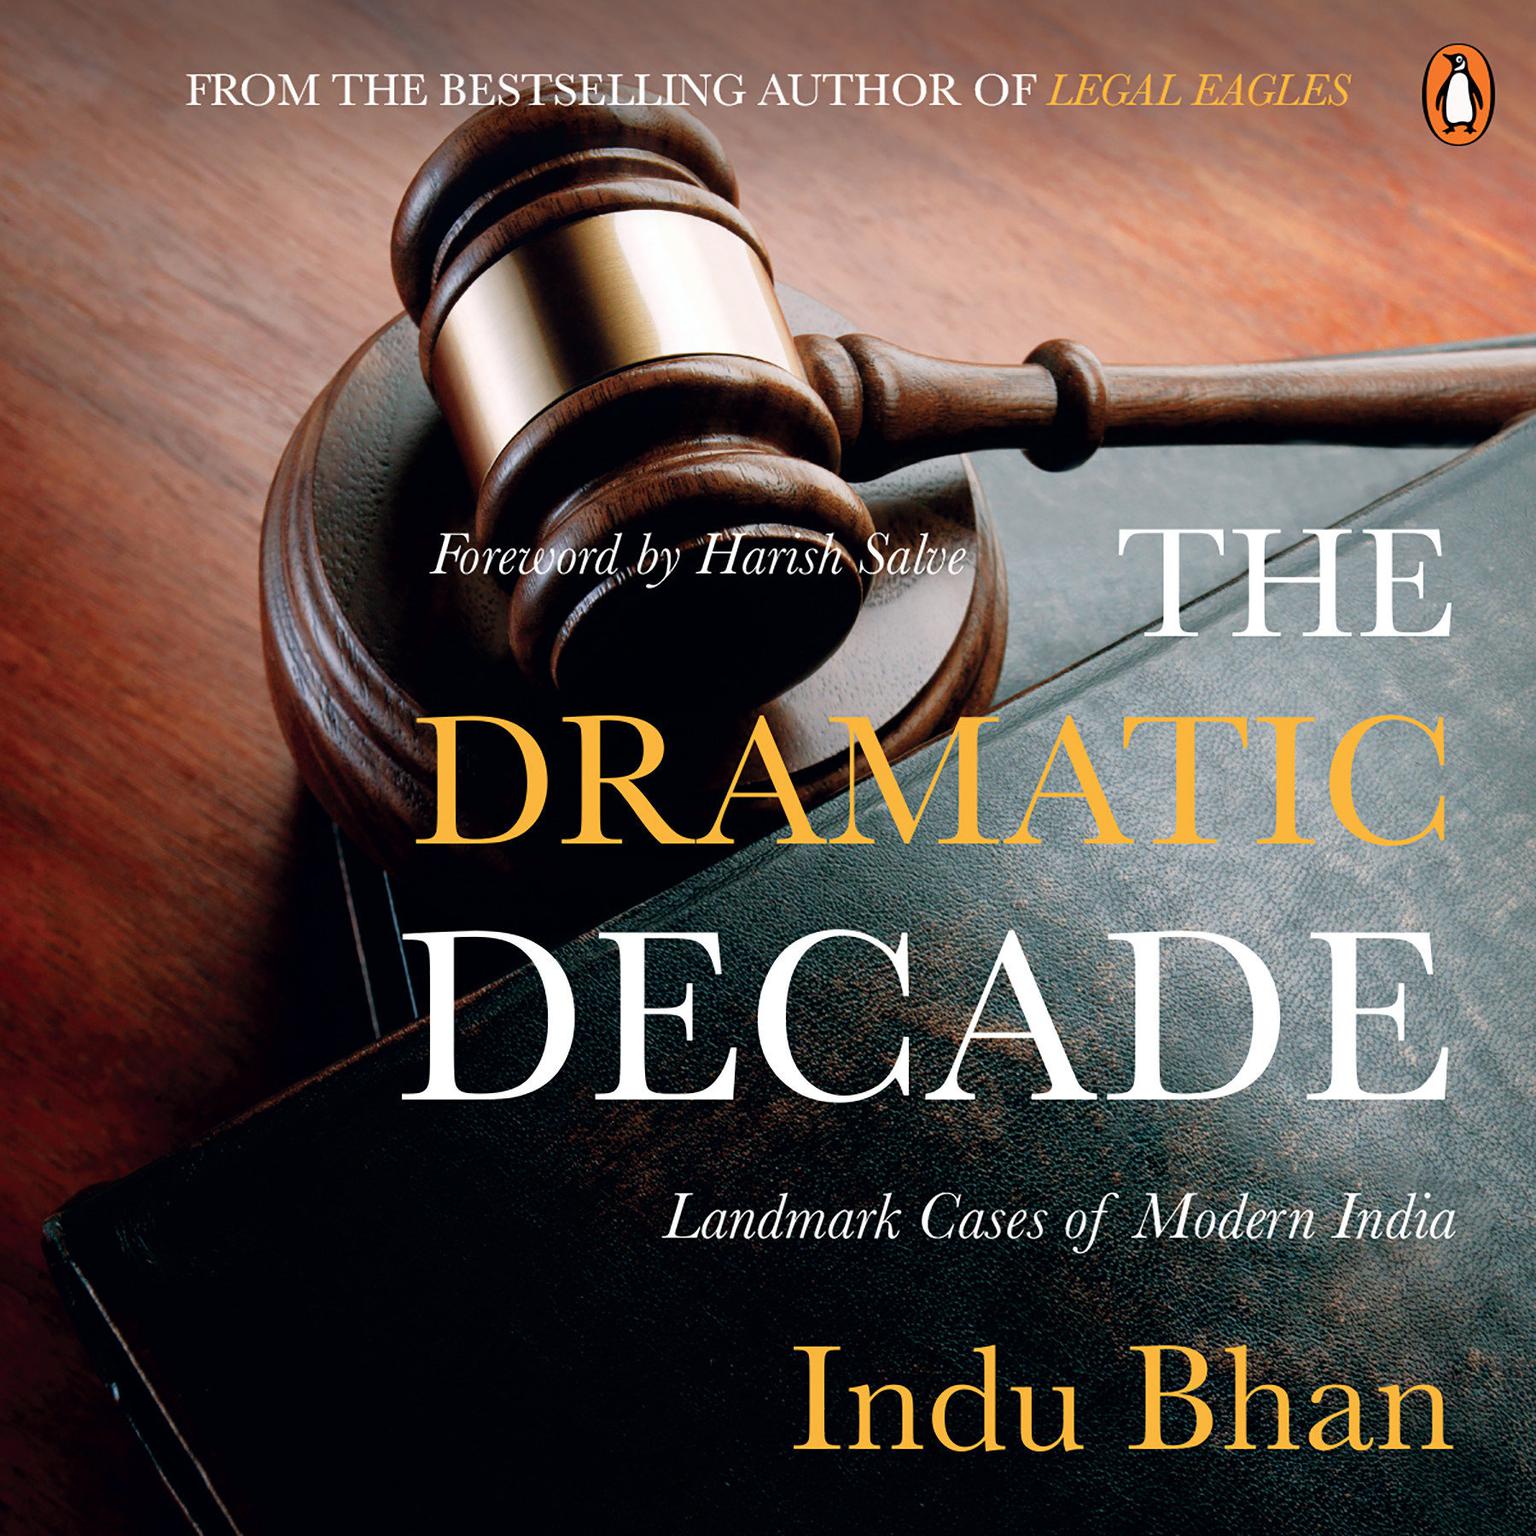 The Dramatic Decade: Landmark Cases Of Modern India Audiobook, by Indu Bhan